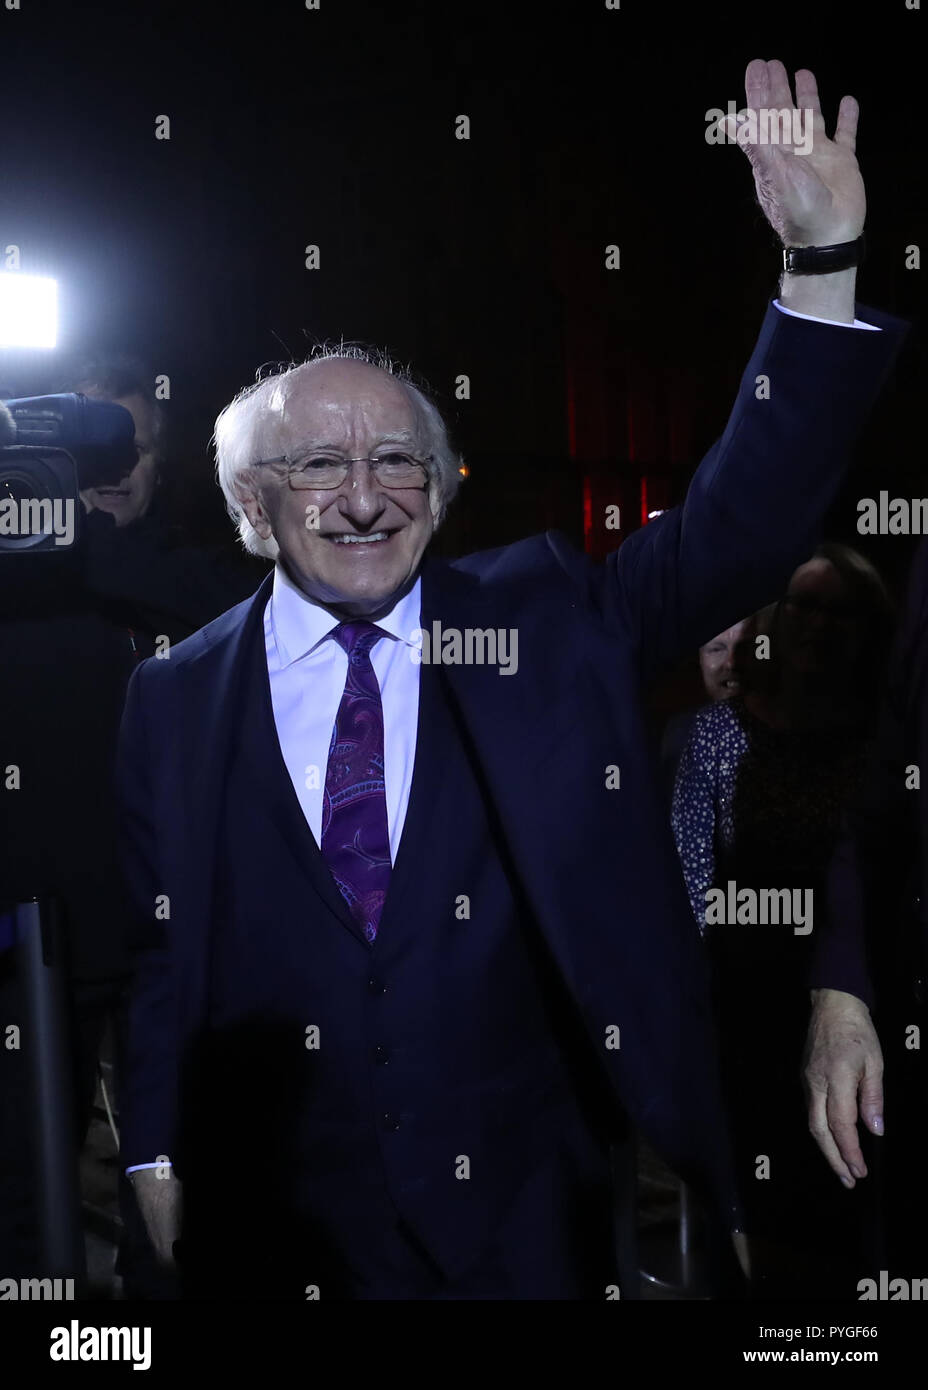 Michael D Higgins arrives at Dublin Castle to attend the count in Ireland's presidential election. Stock Photo